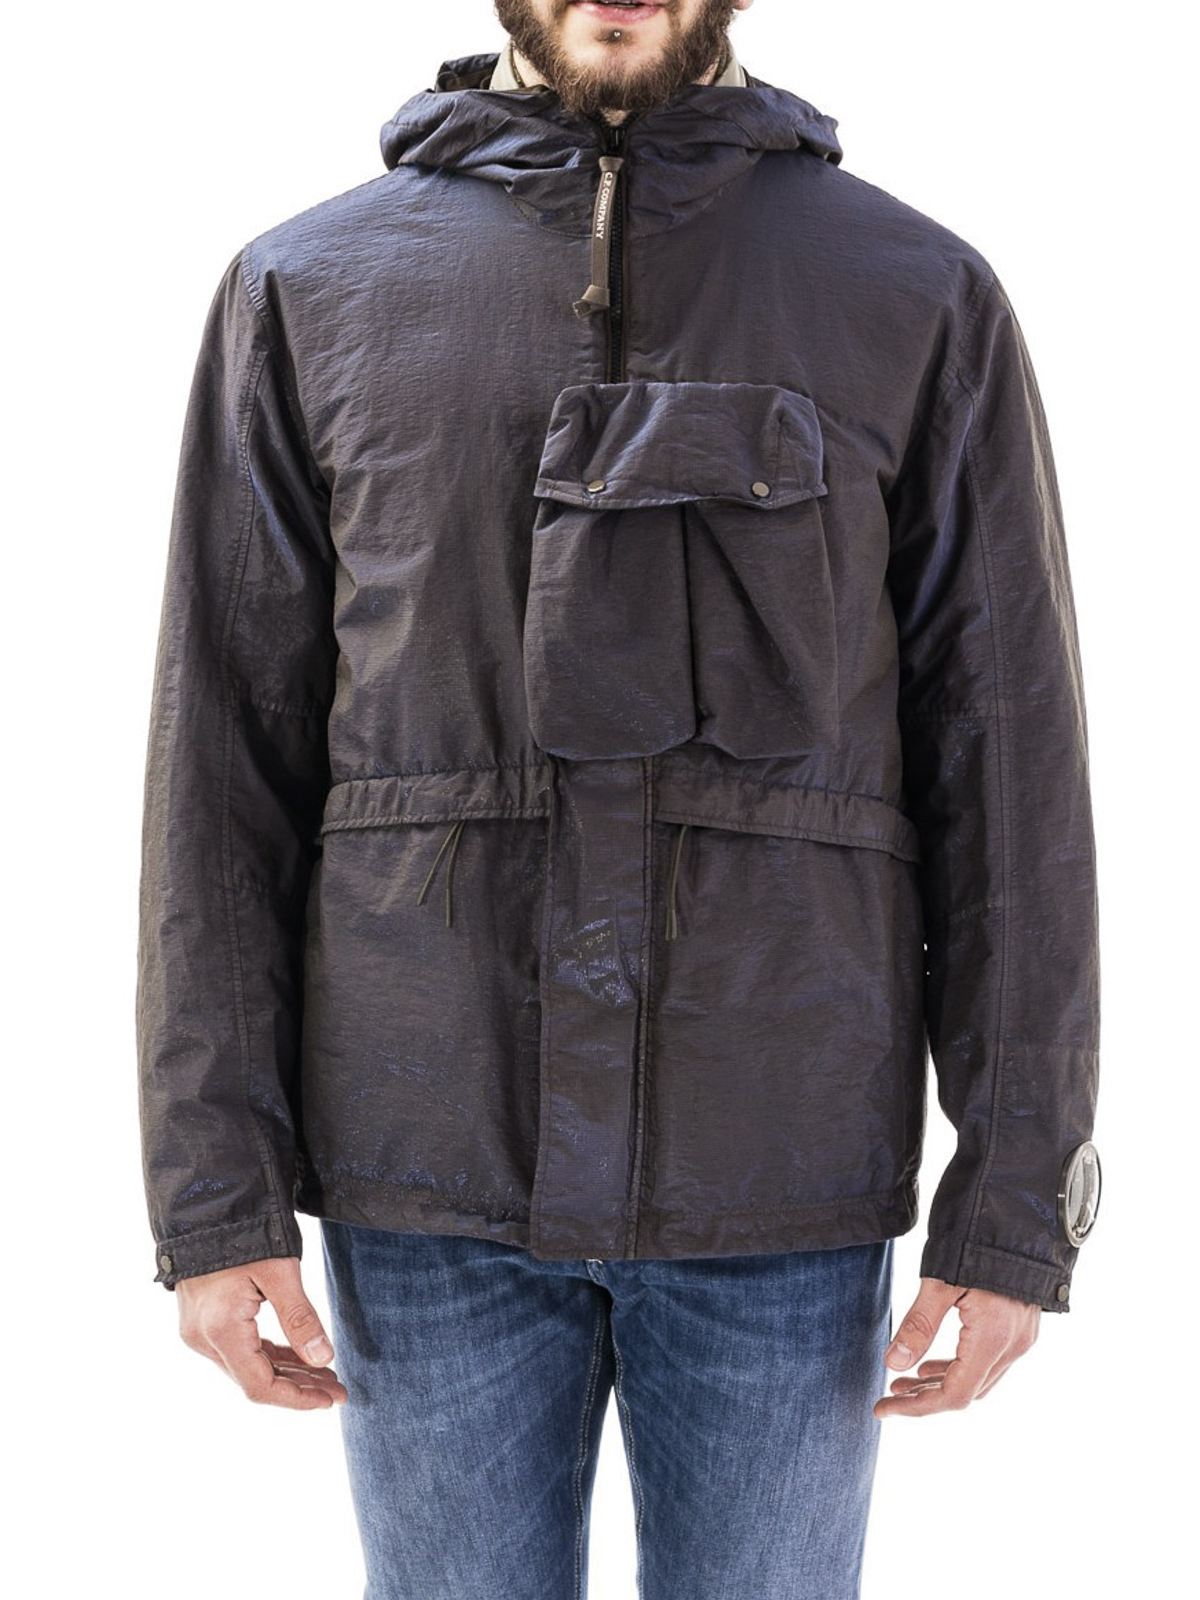 Ambassade Hertogin expeditie Casual jackets C.P. Company - P.Ri.S.M. Mille Miglia goggle jacket -  08CMOW214A005686GV01